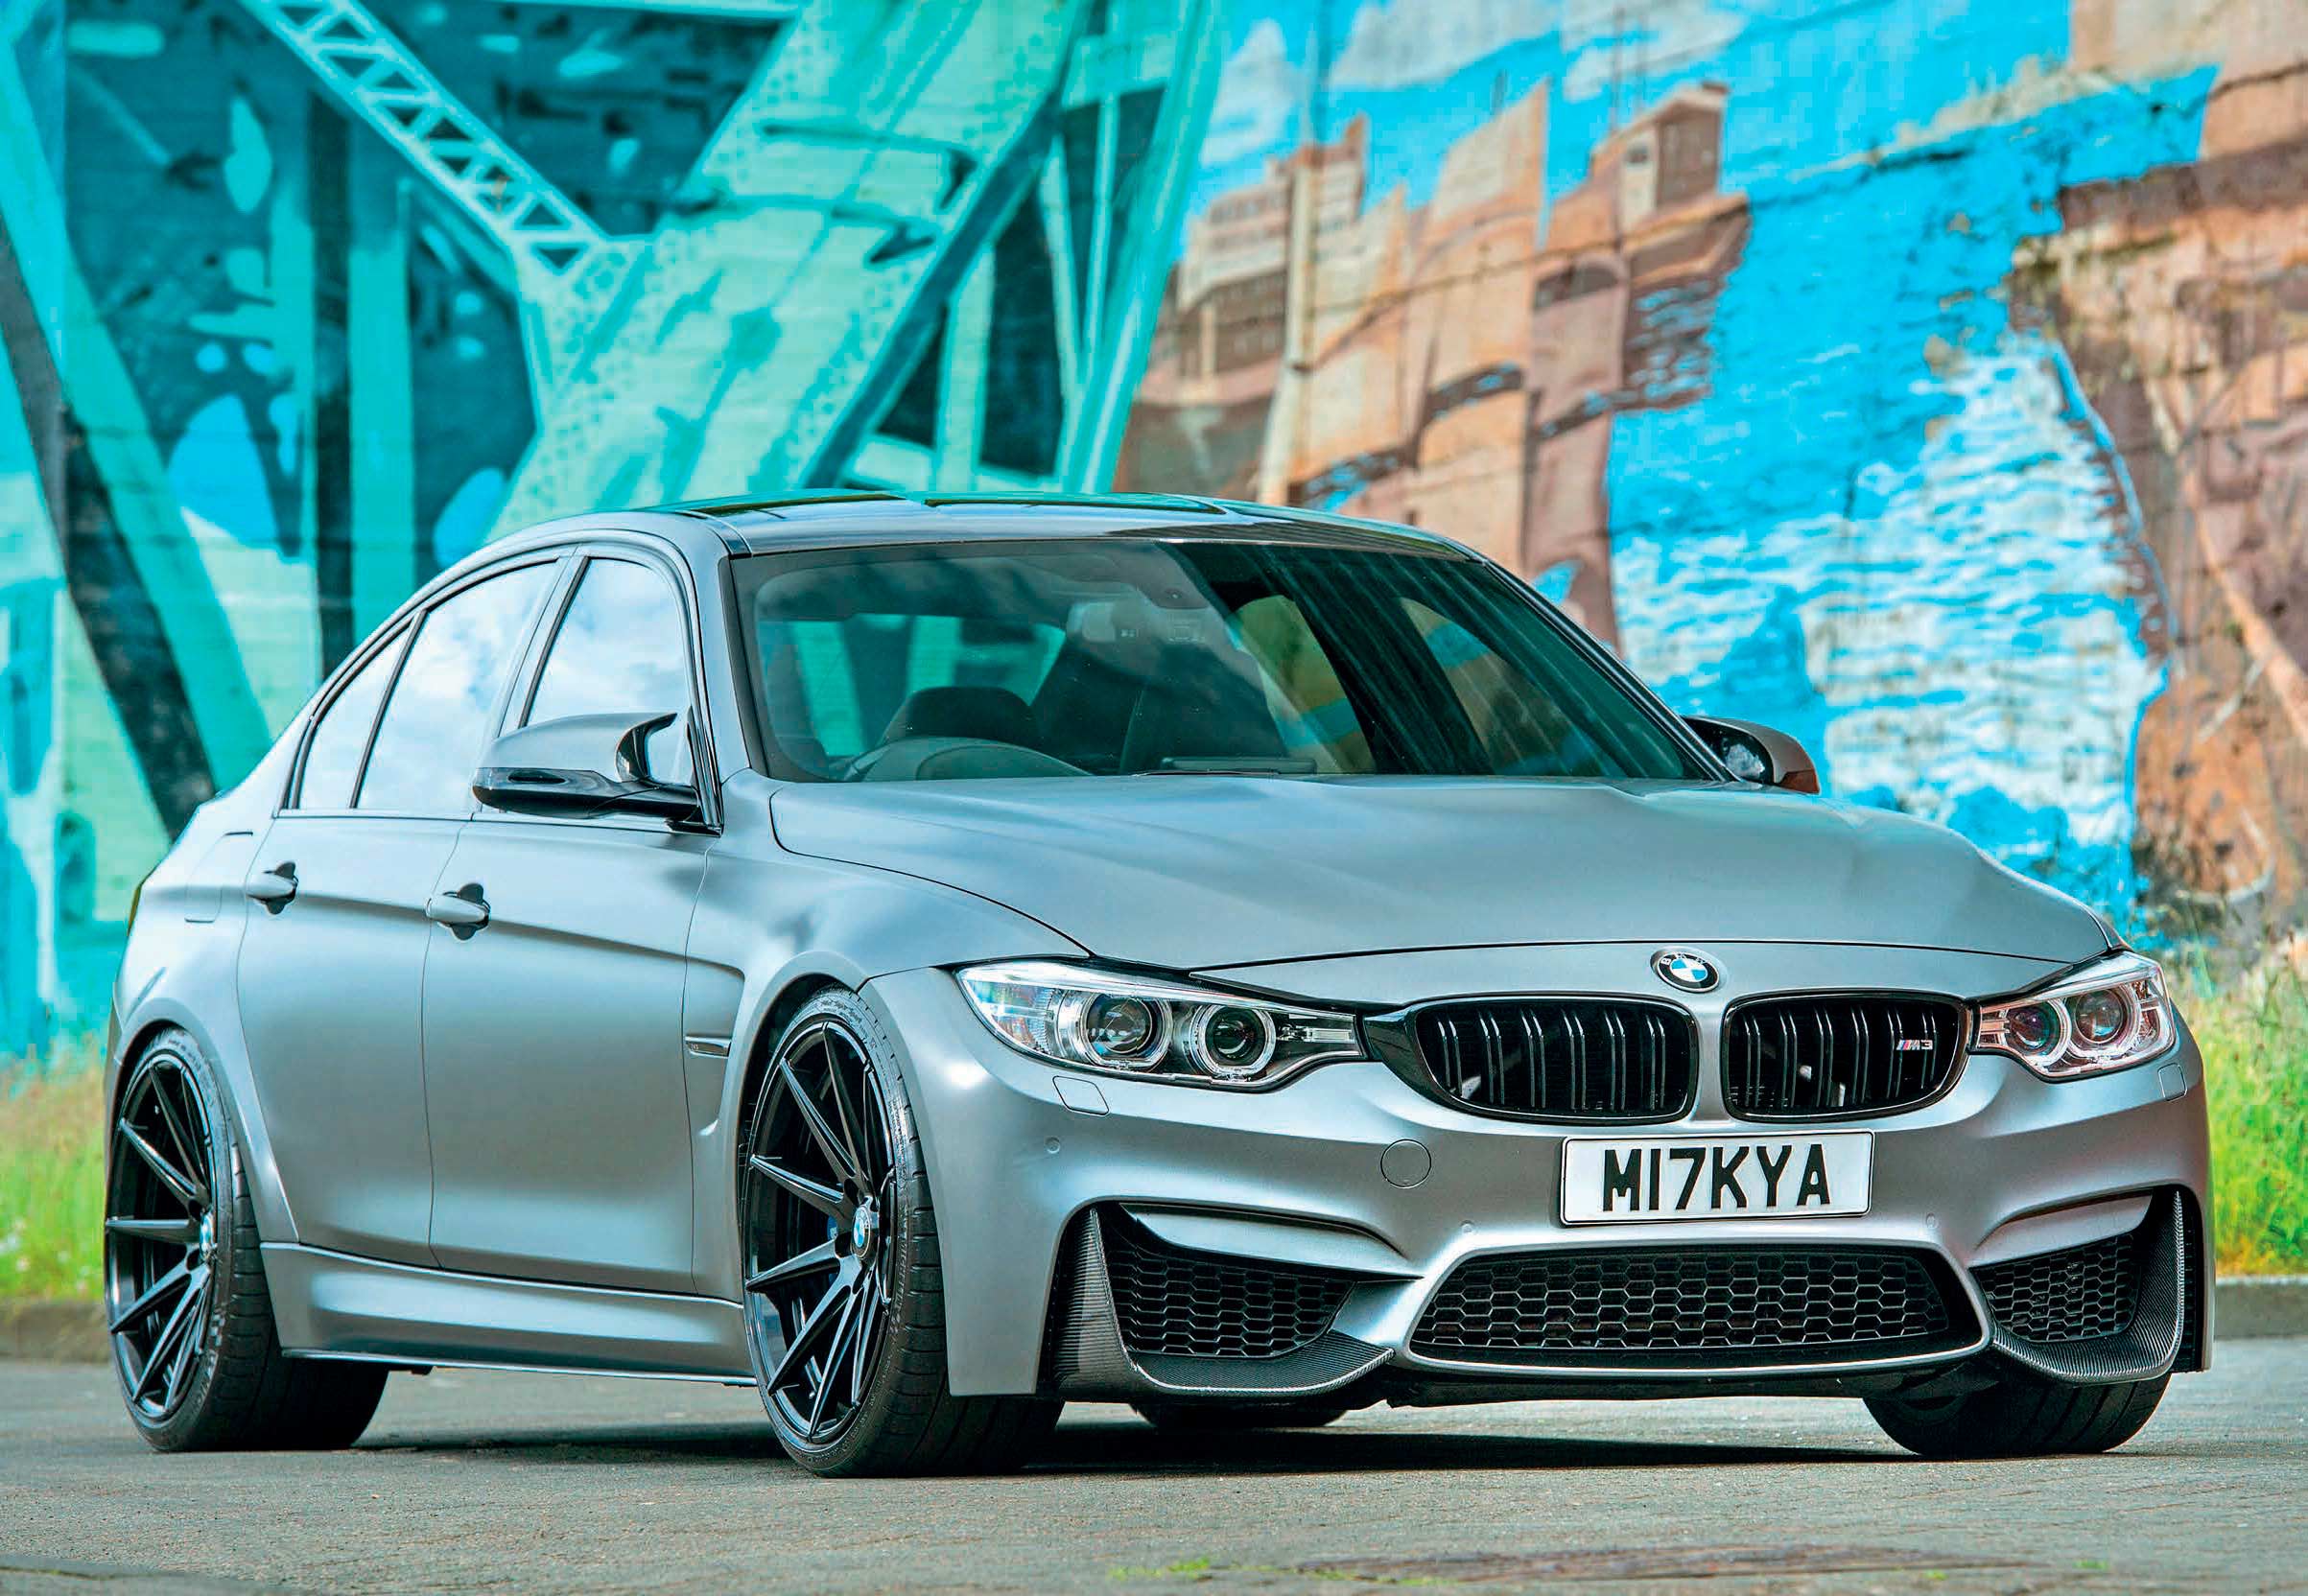 Subtly Styled And Seriously 700bhp Powerful Bmw M3 F80 Drive My Blogs Drive